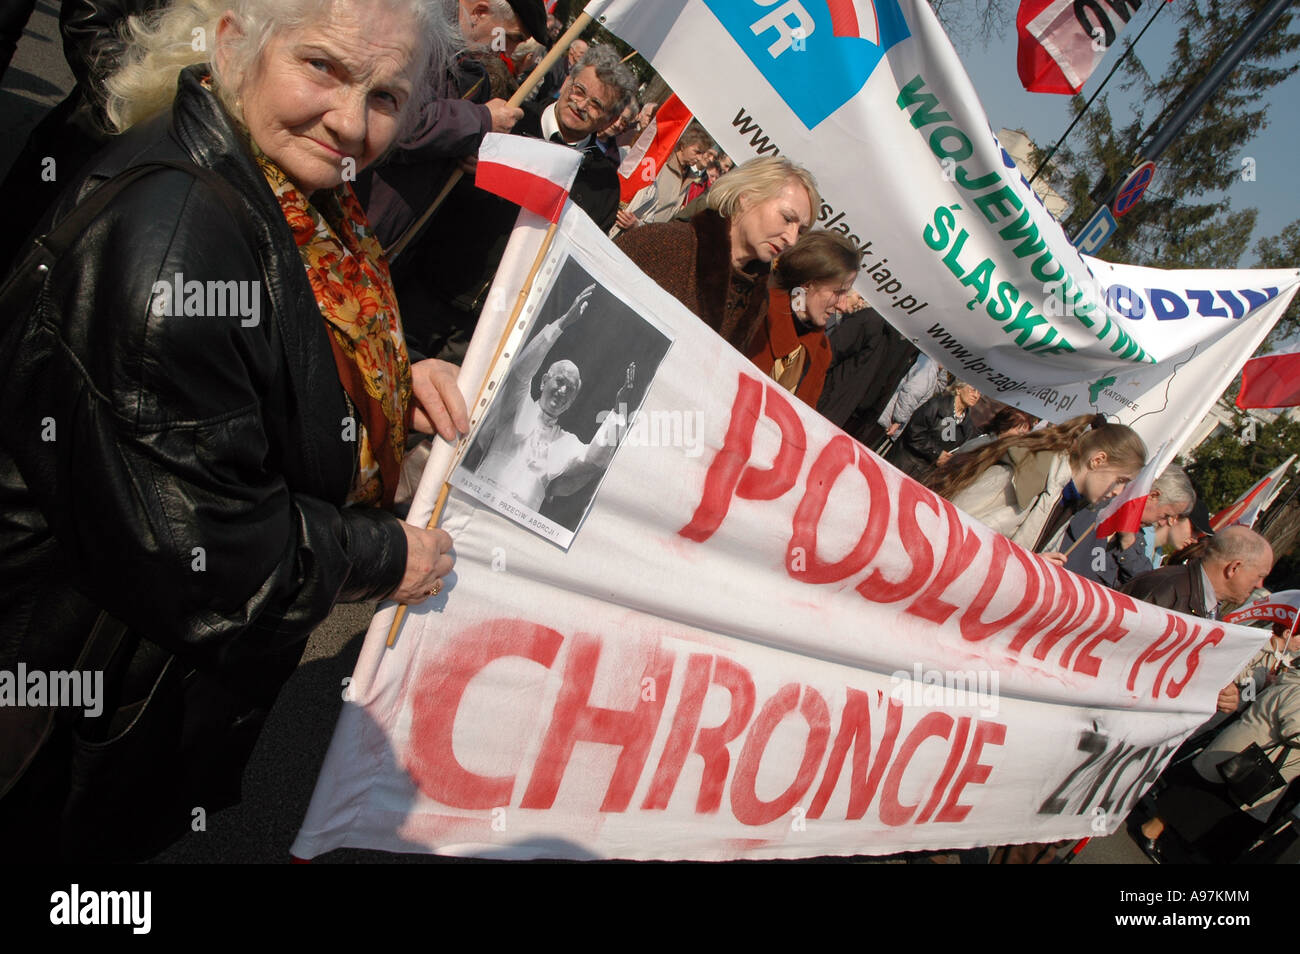 Woman during anti-abortion demonstration in Warsaw, Poland, 'Deputies, protect a life' - saids a slogan. Stock Photo